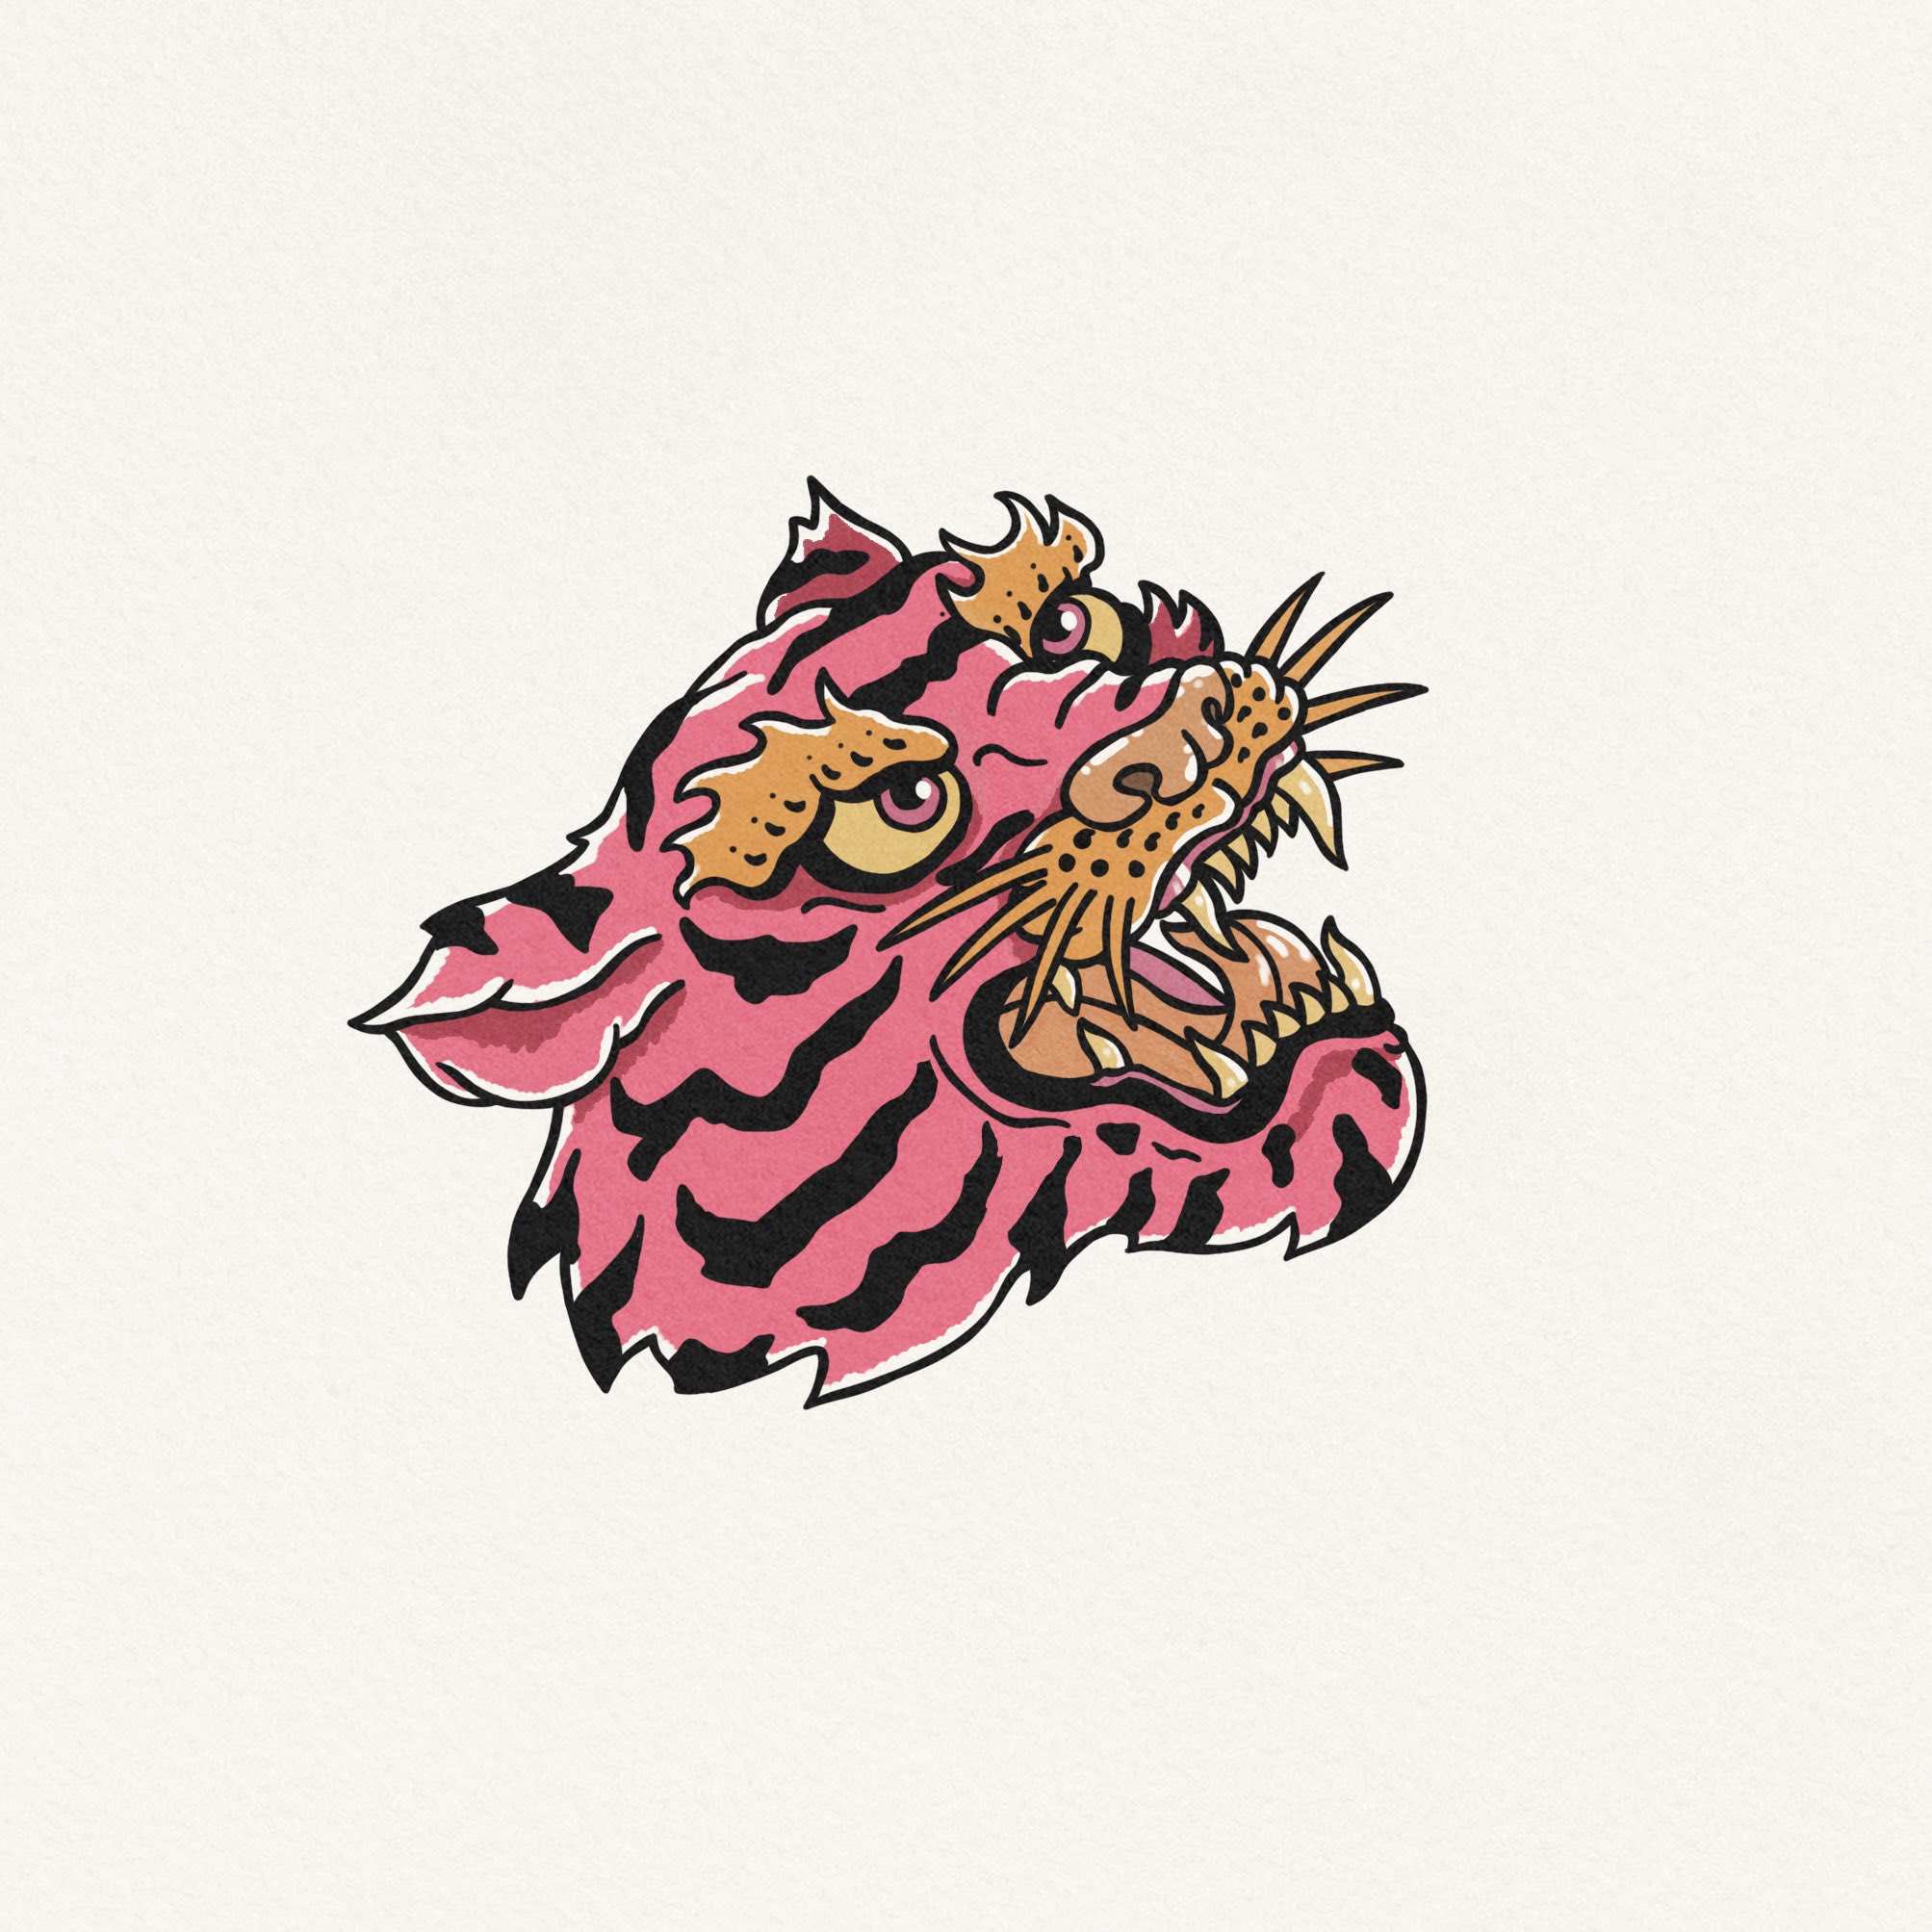 Tigers  Snakes Authentic Tattoo Flash by Norman Collins aka Sailor  Jerry Art Print   piddix  Artcom